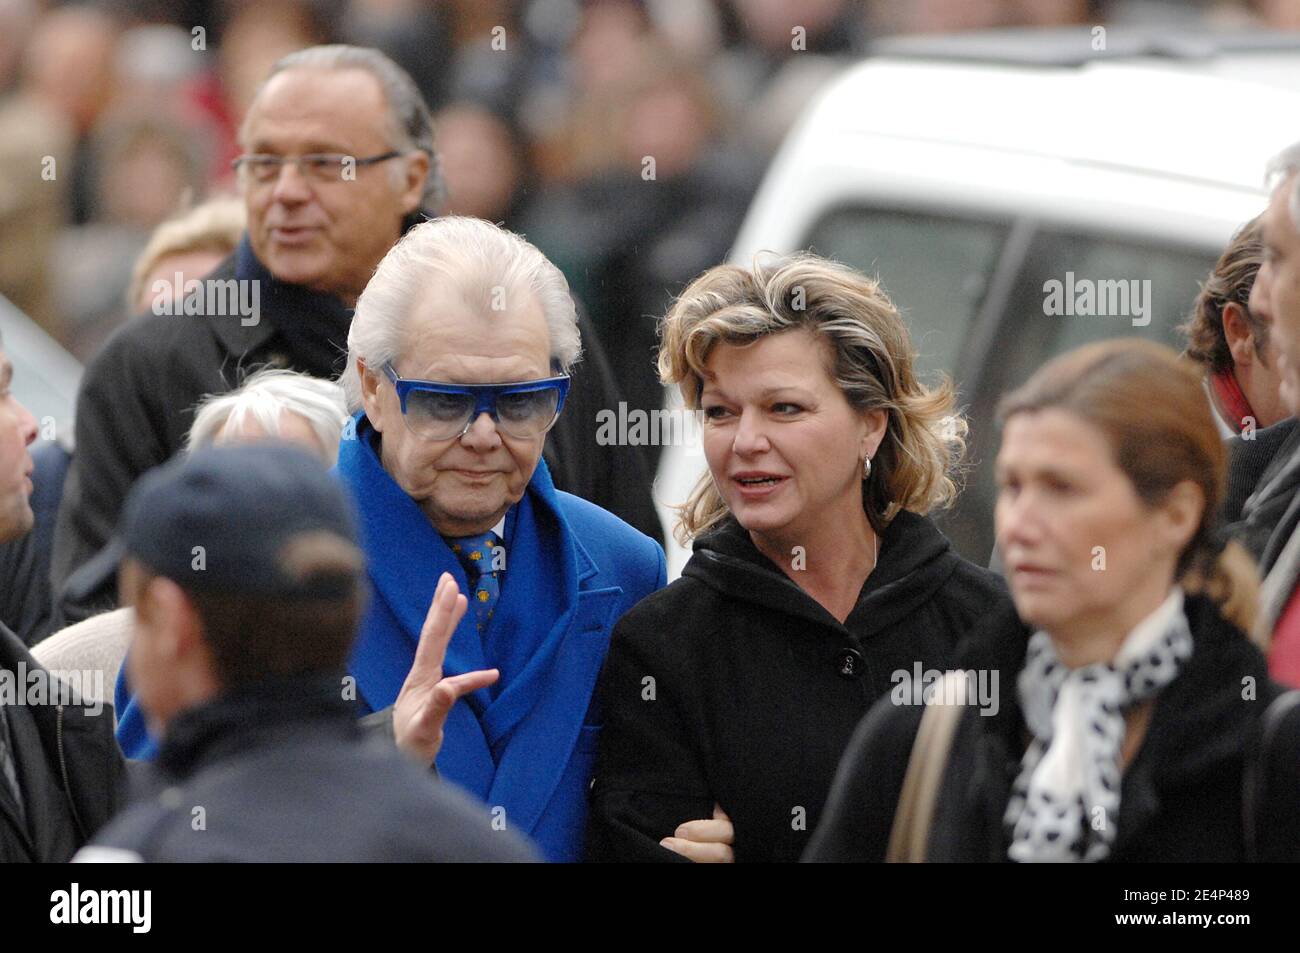 Michou and Jeane Manson arrive at St Germain church to attend the funeral mass of singer Carlos in Paris, France on January 22, 2008. Photo by Guibbaud-Khayat-Mousse/ABACAPRESS.COM Stock Photo